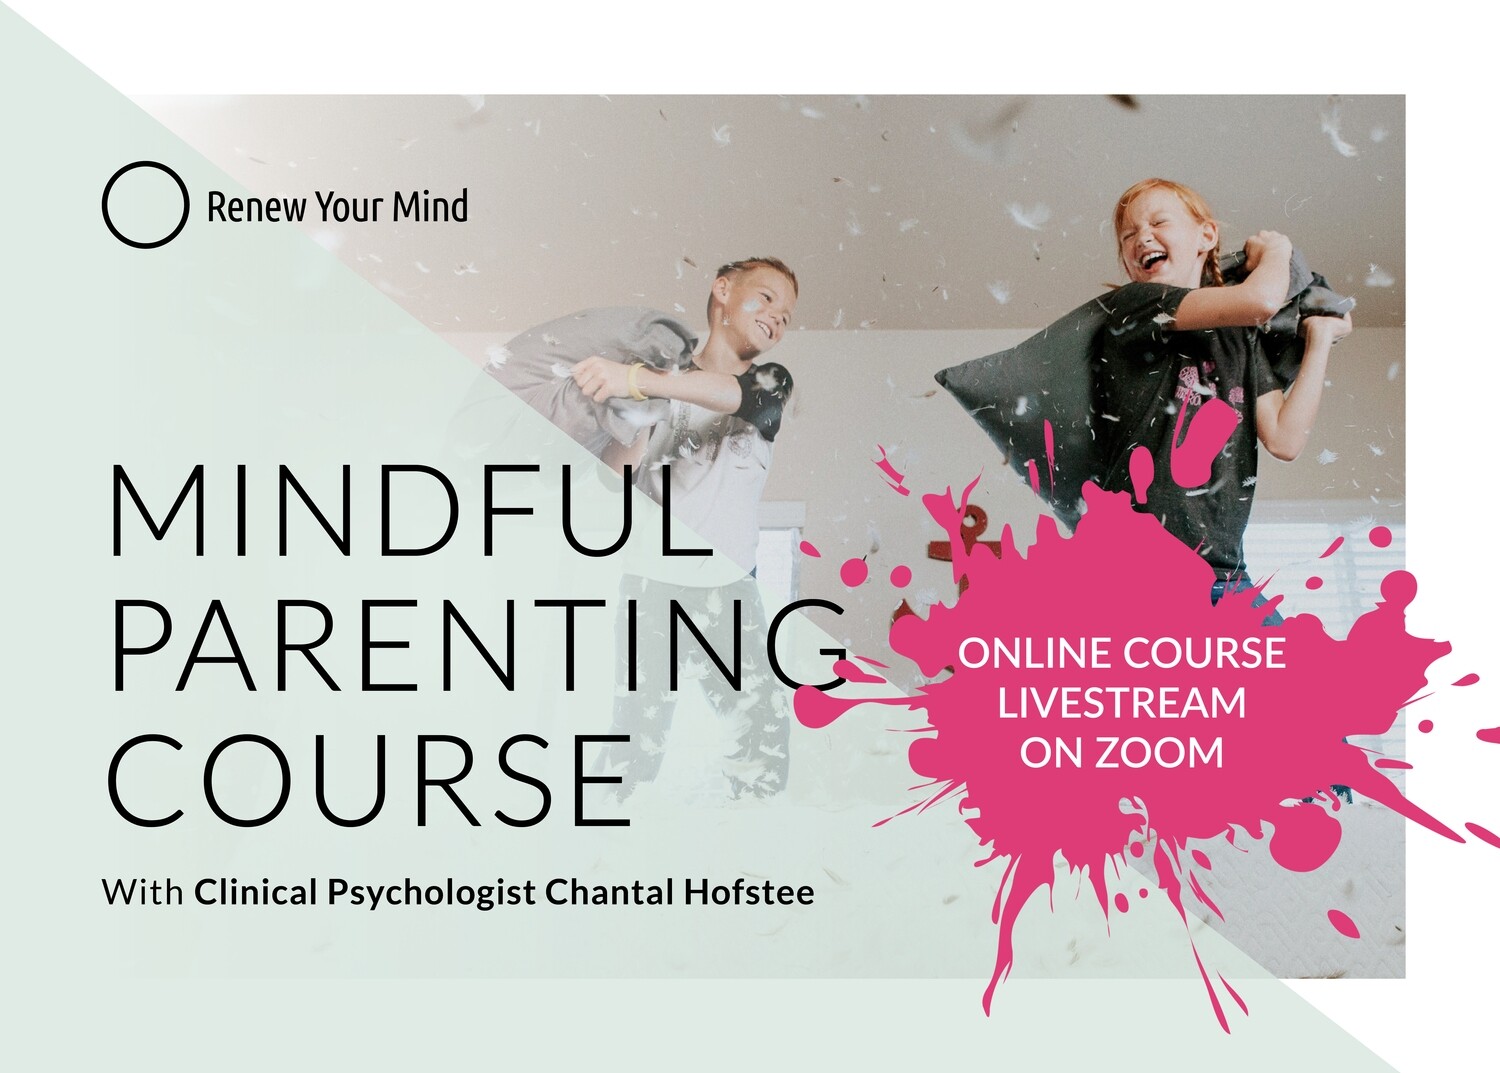 Online Mindful Parenting course: 6 session course, starting Wed 3 Nov '21